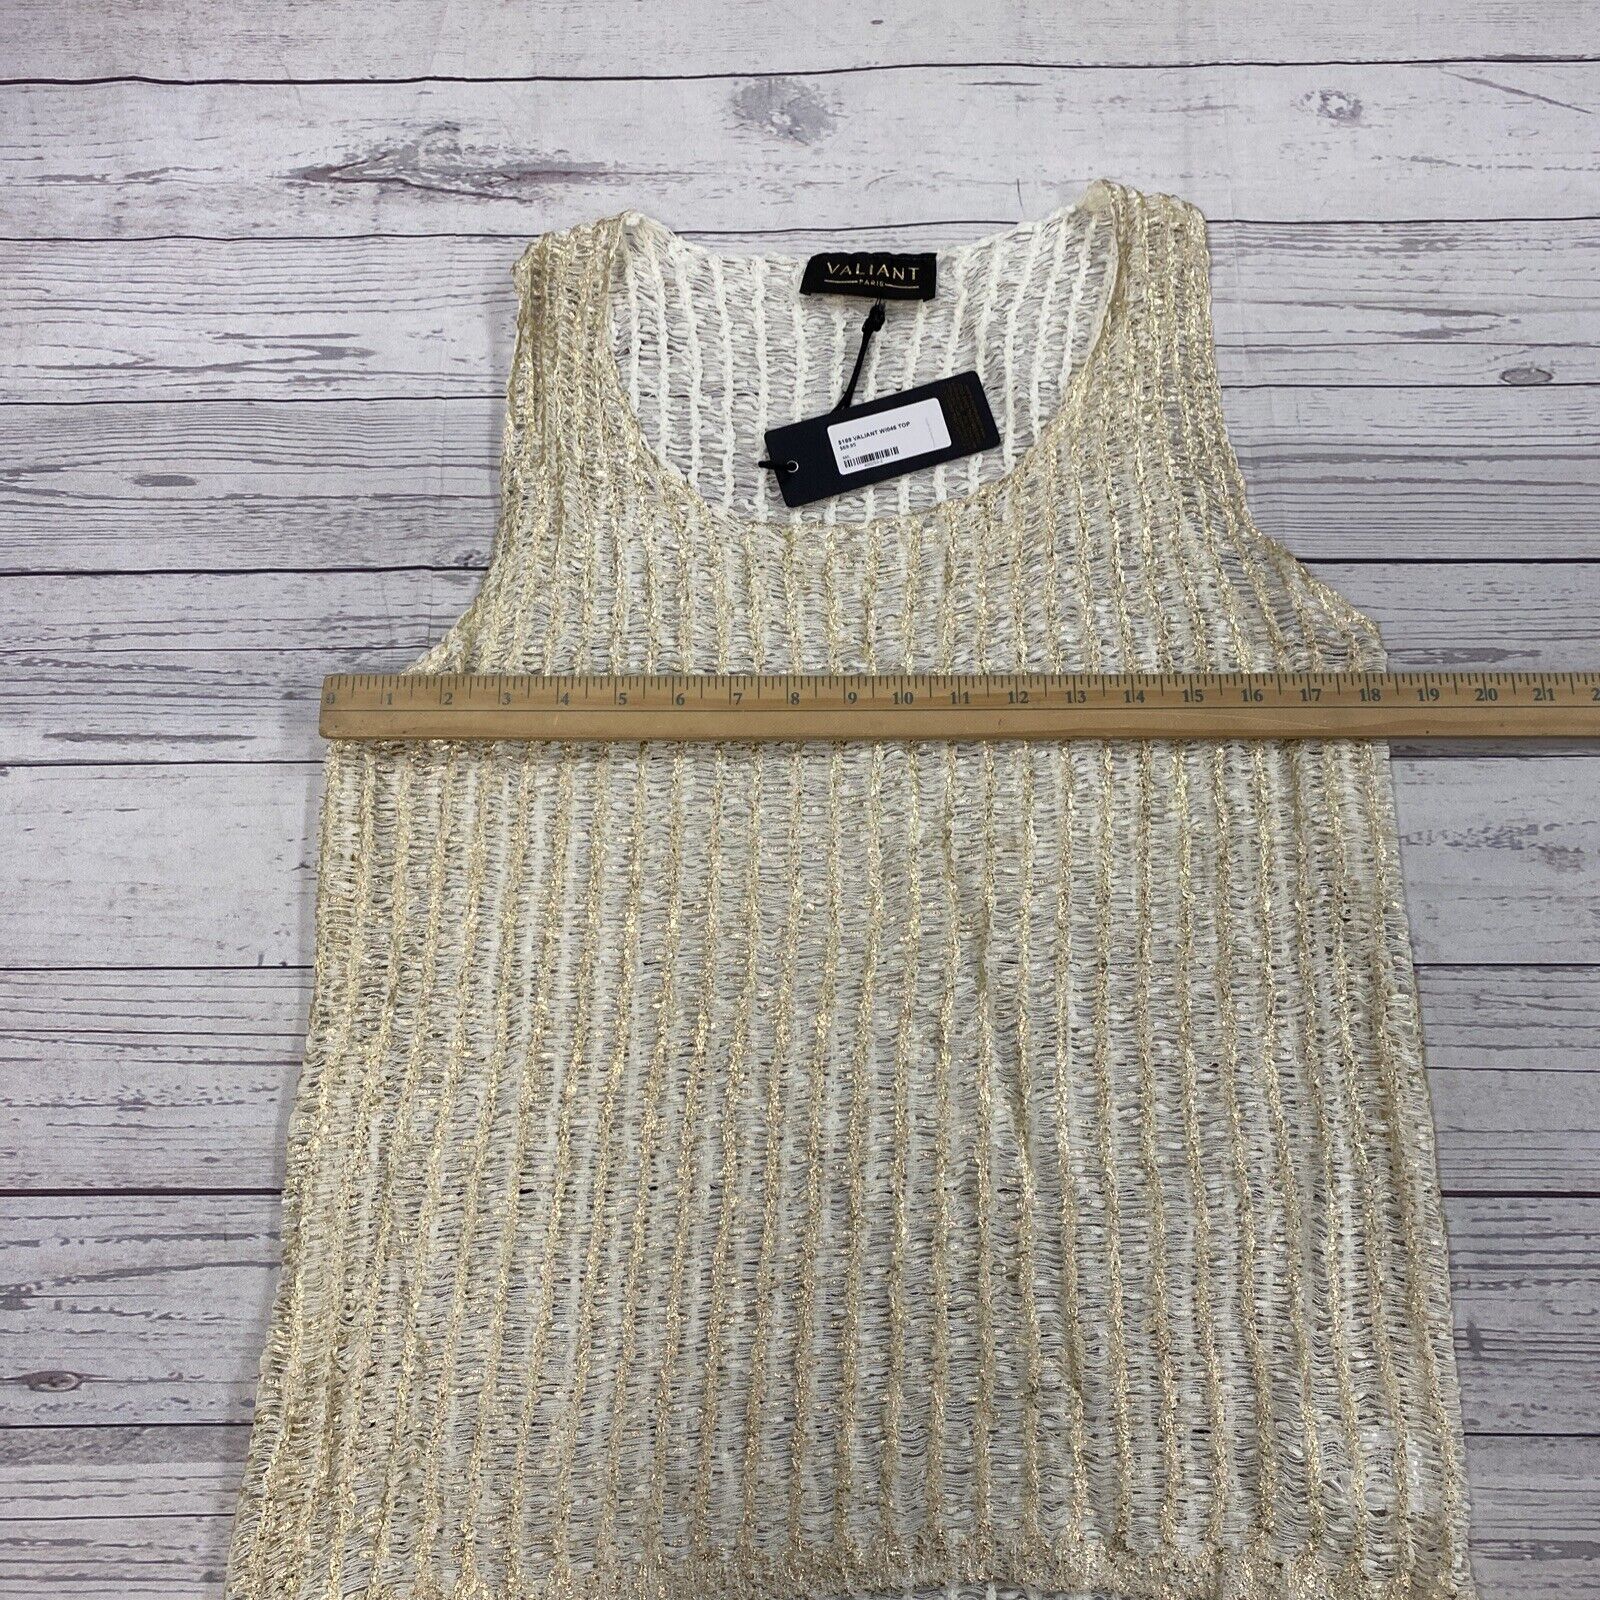 Valiant Paris WI046 Cream And Gold Crocheted Tank Top￼ Women's Size M/ -  beyond exchange